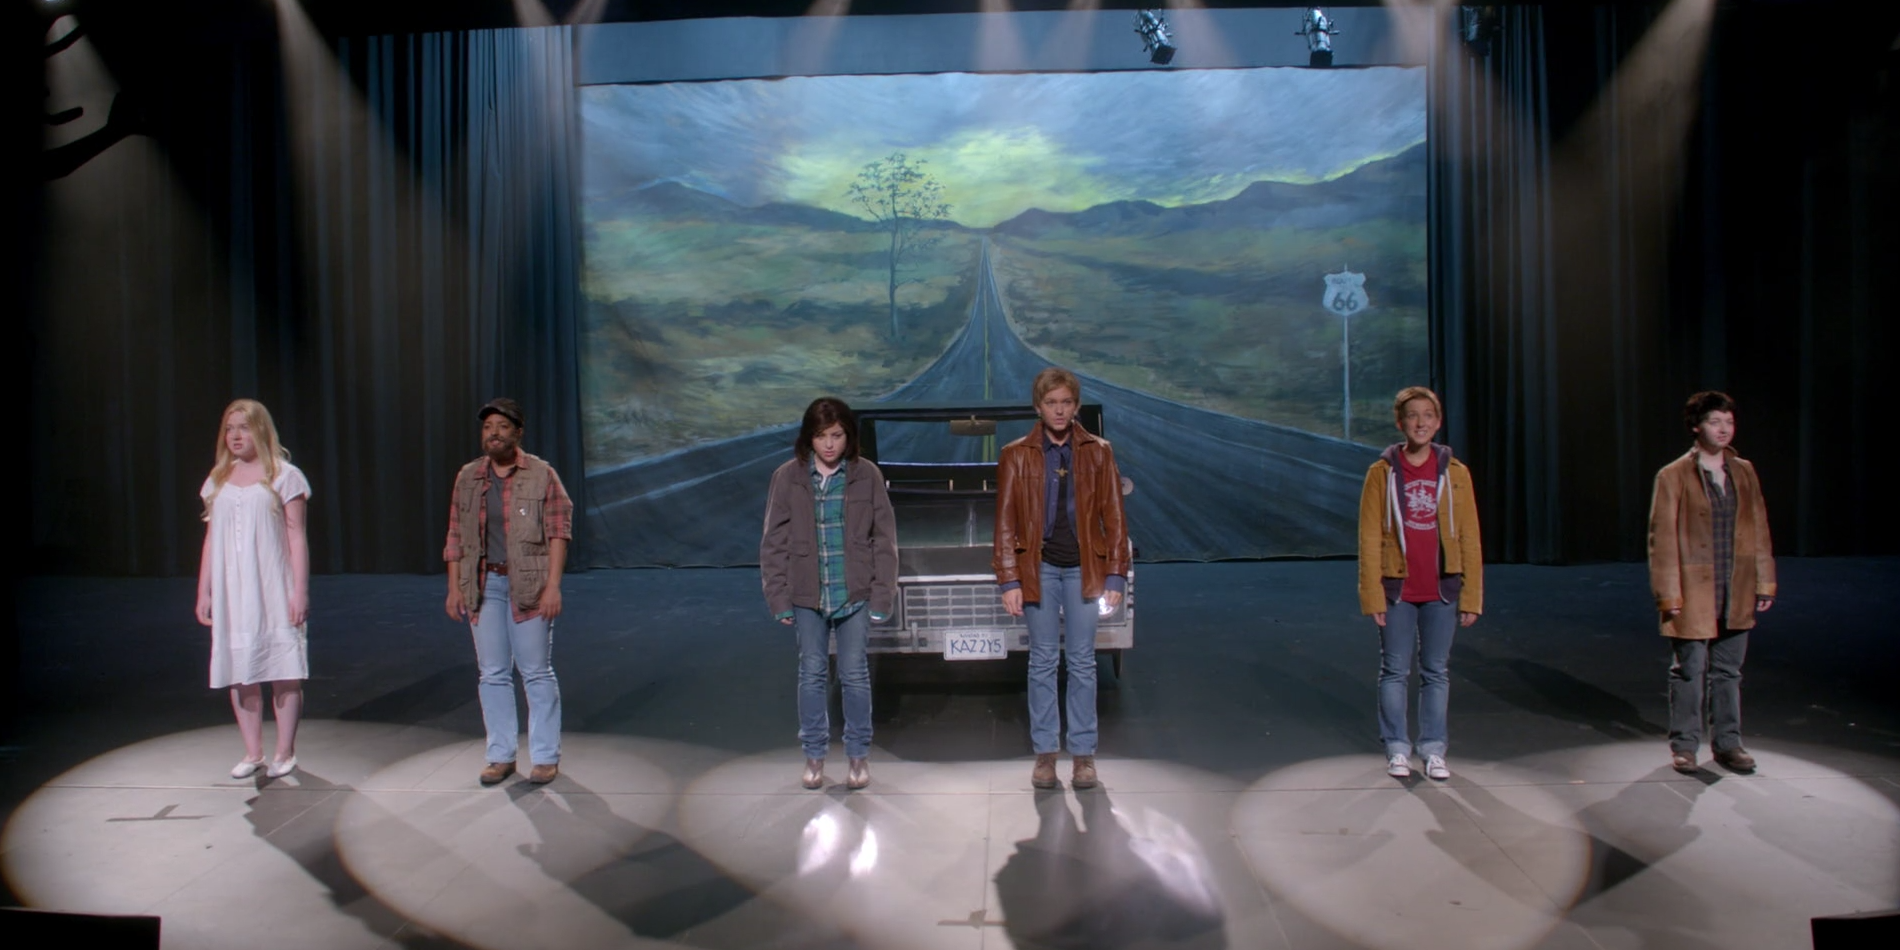 The cast of Supernatural the Musical sing Carry On Wayward Son in Fan Fiction in Supernatural